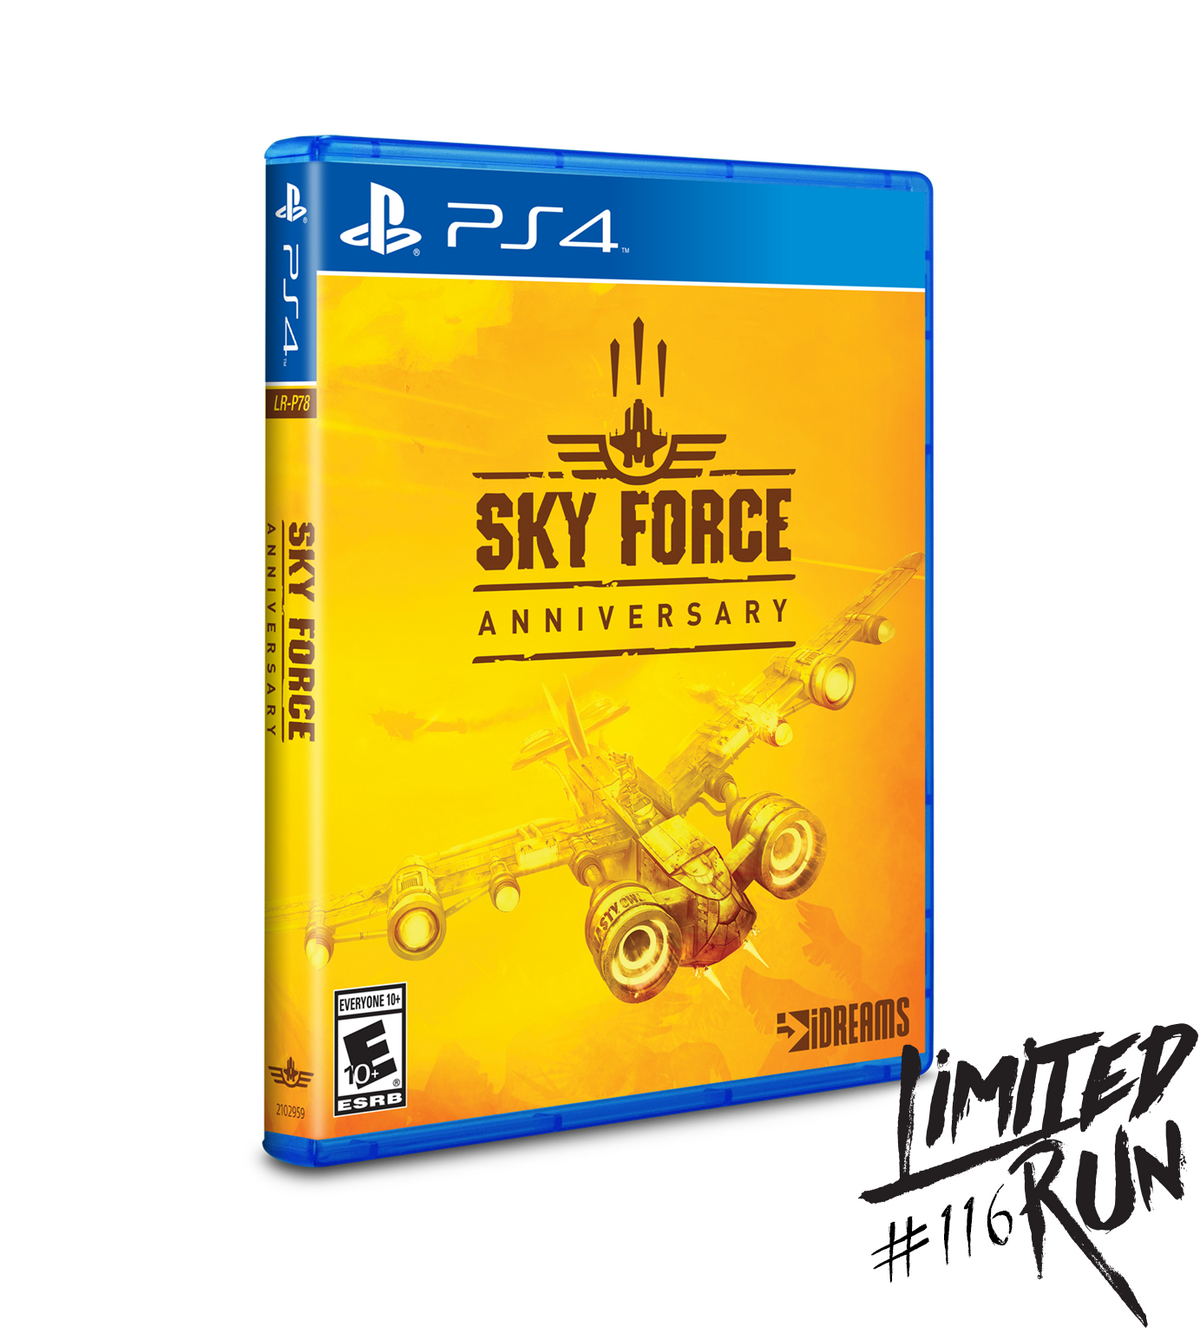 Limited Run #116: Sky Force Anniversary (PS4)